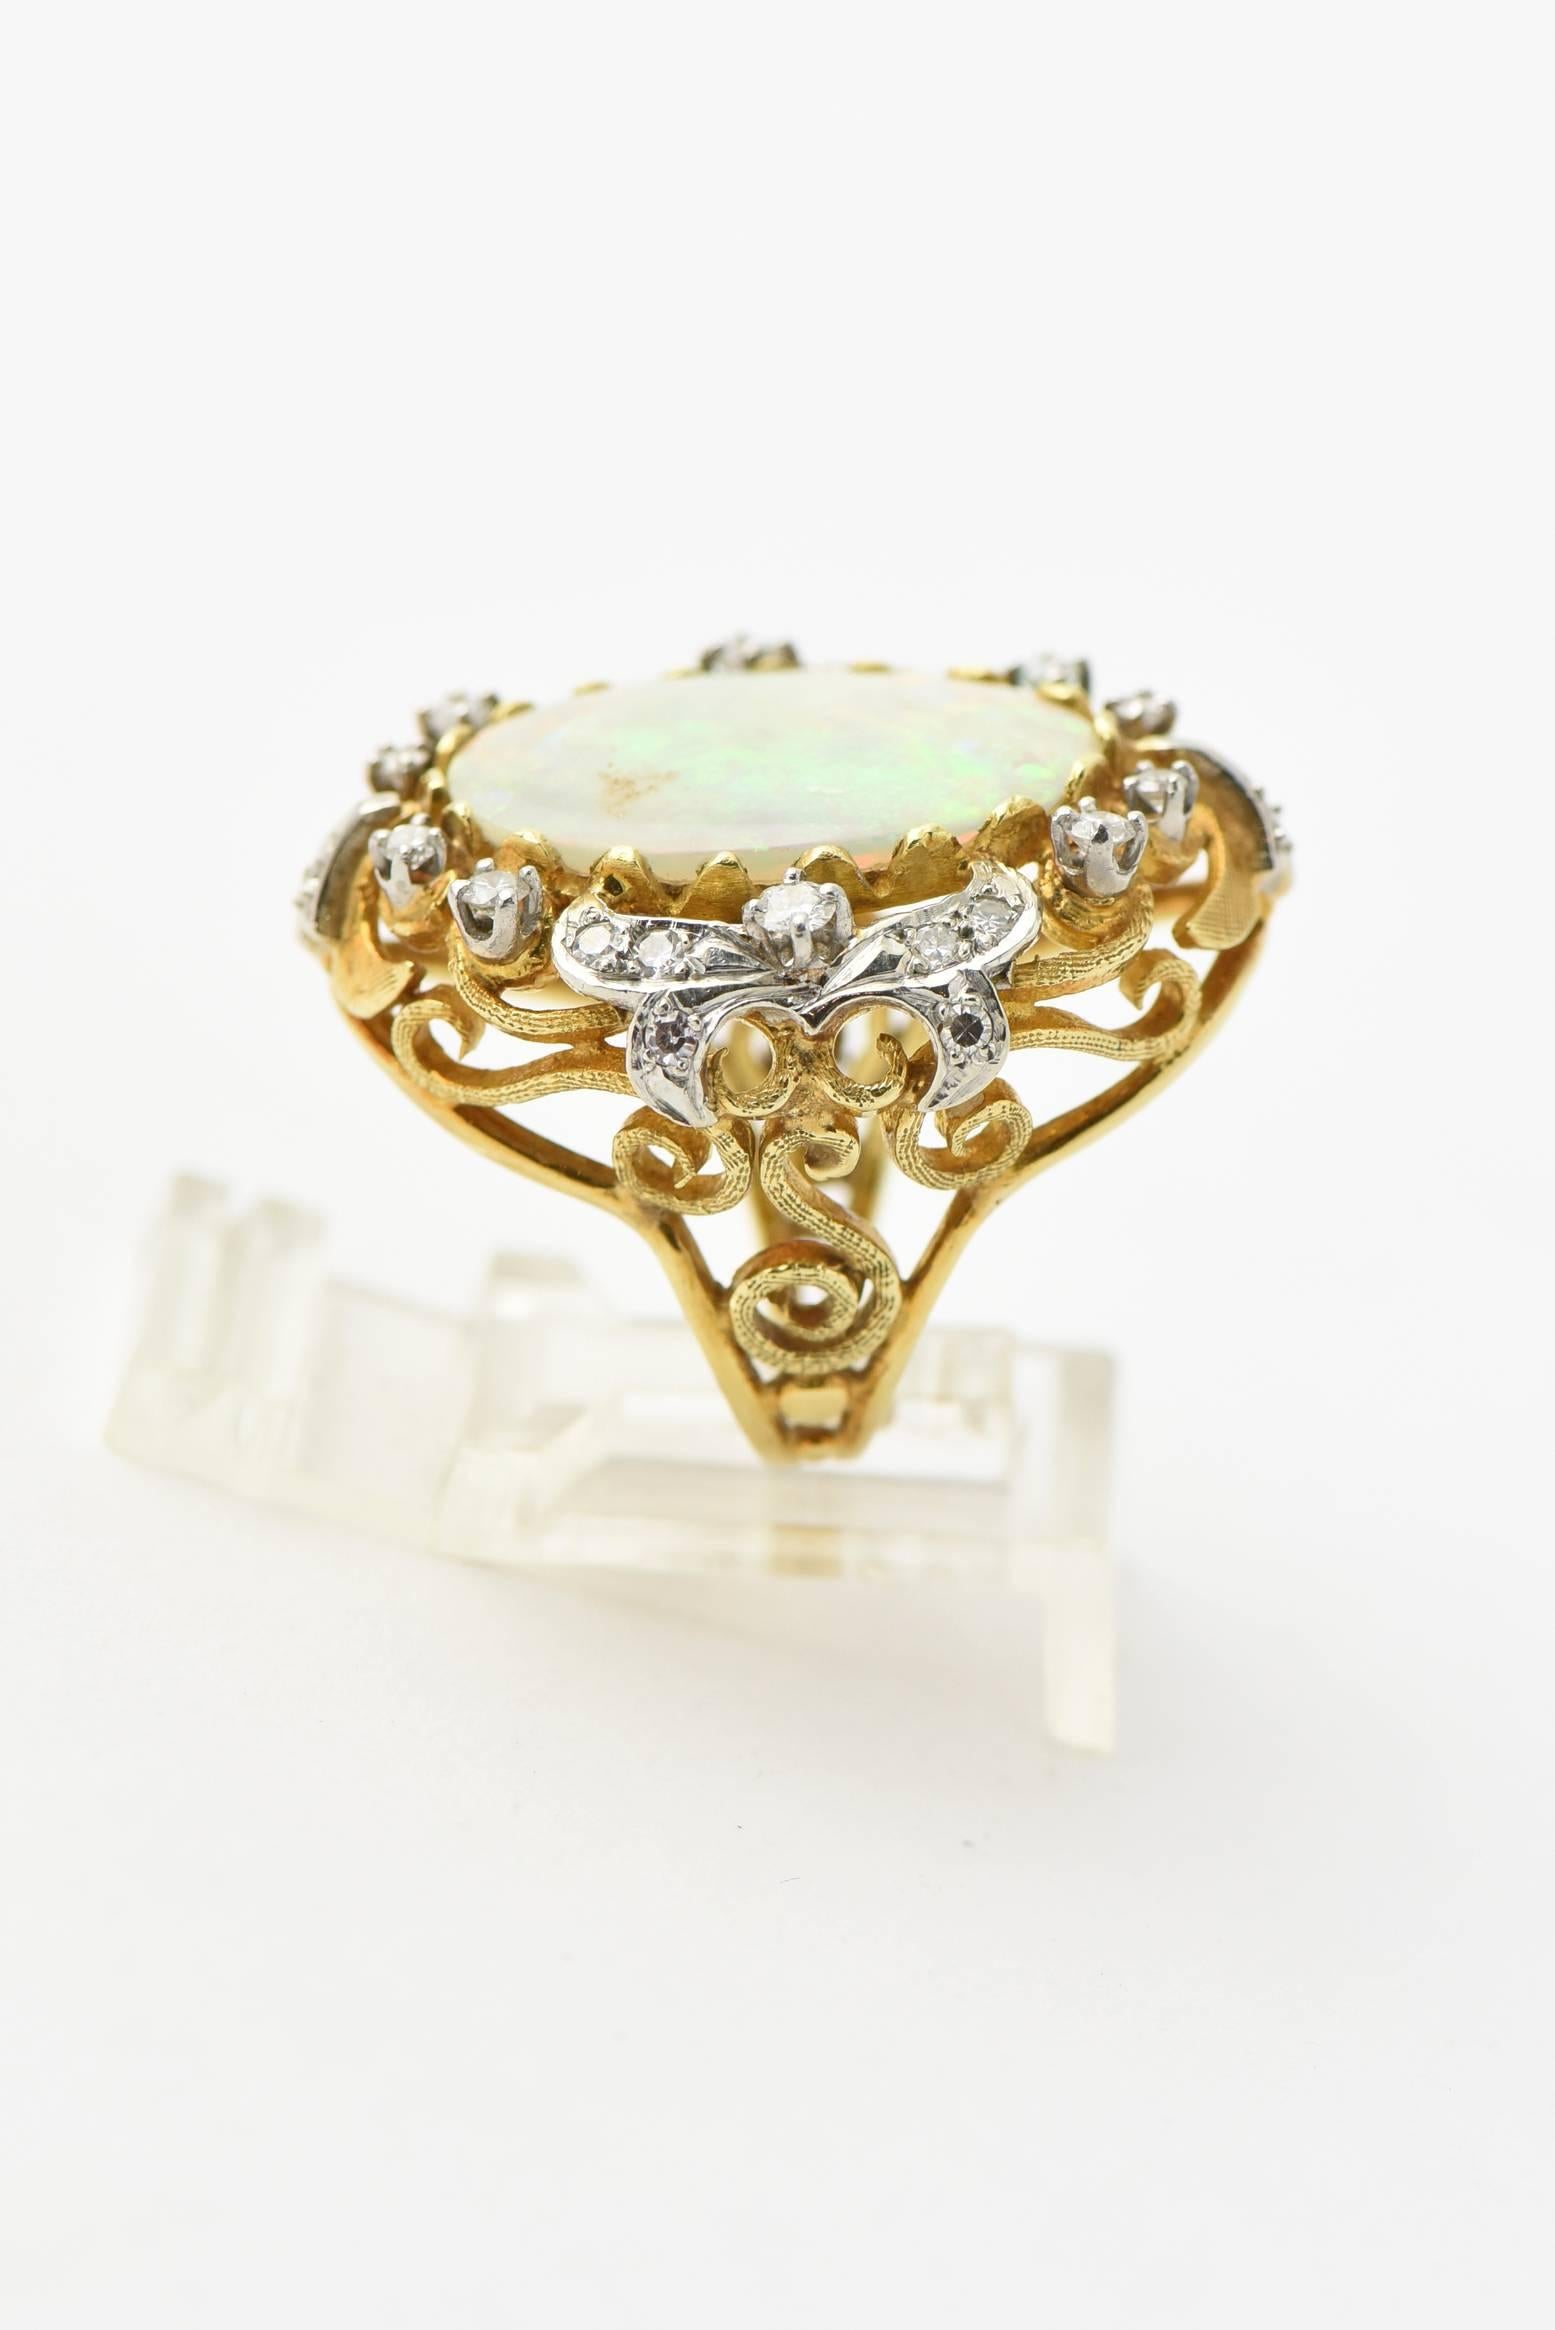 Mid-20th Century Fine Australian Gray Opal Diamond Gold Cocktail Statement Ring In Good Condition For Sale In Miami Beach, FL